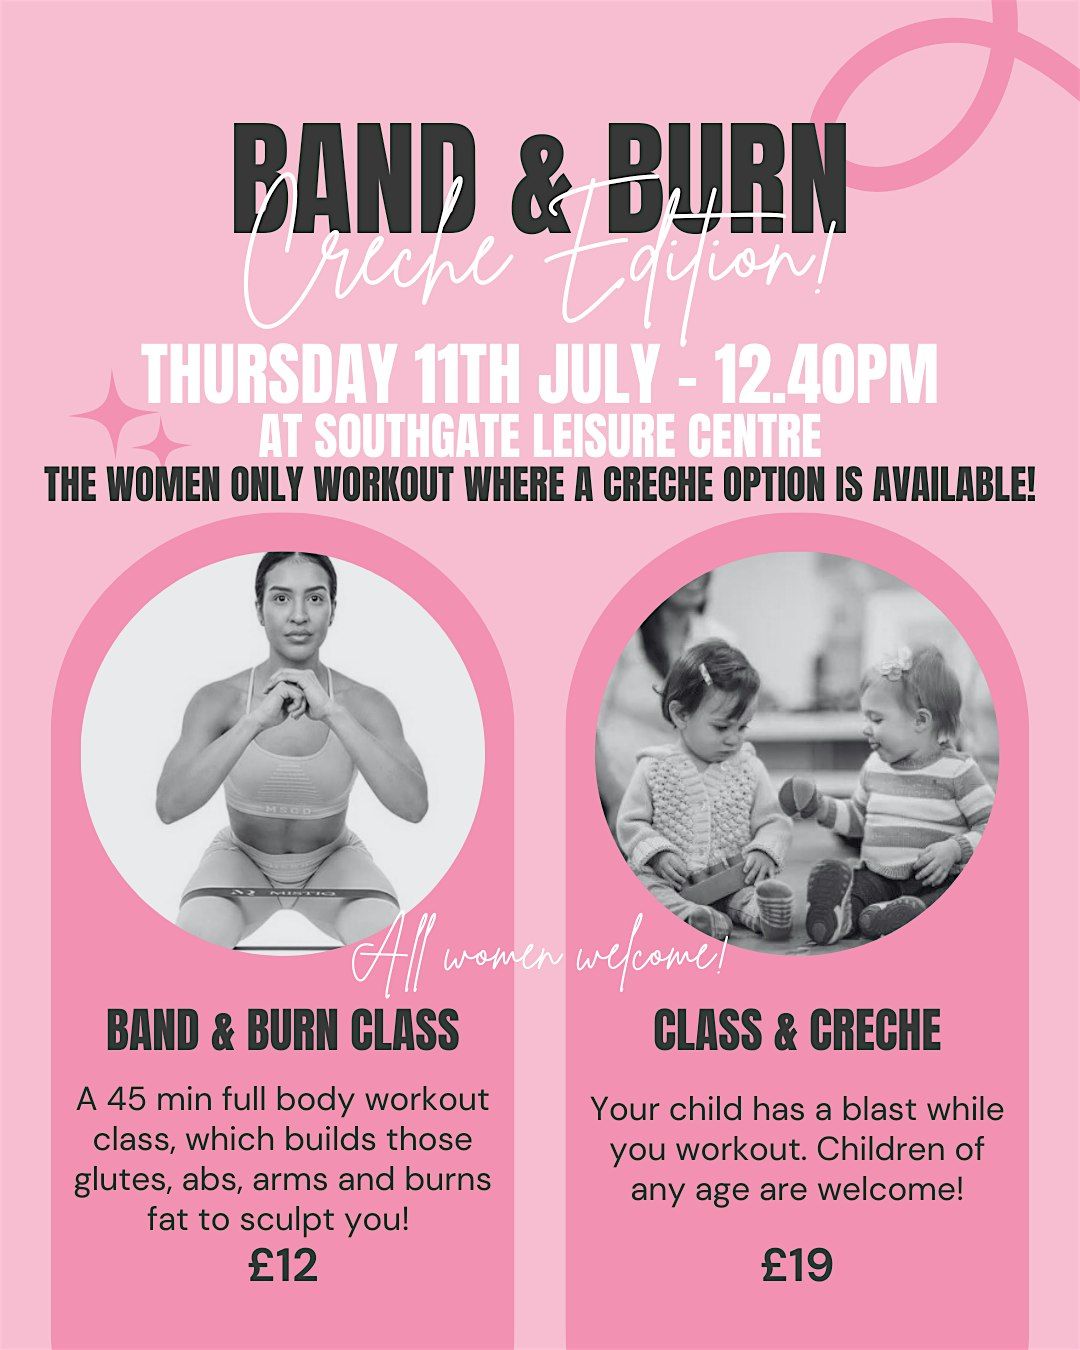 Full body banded workout with a creche for your kids!